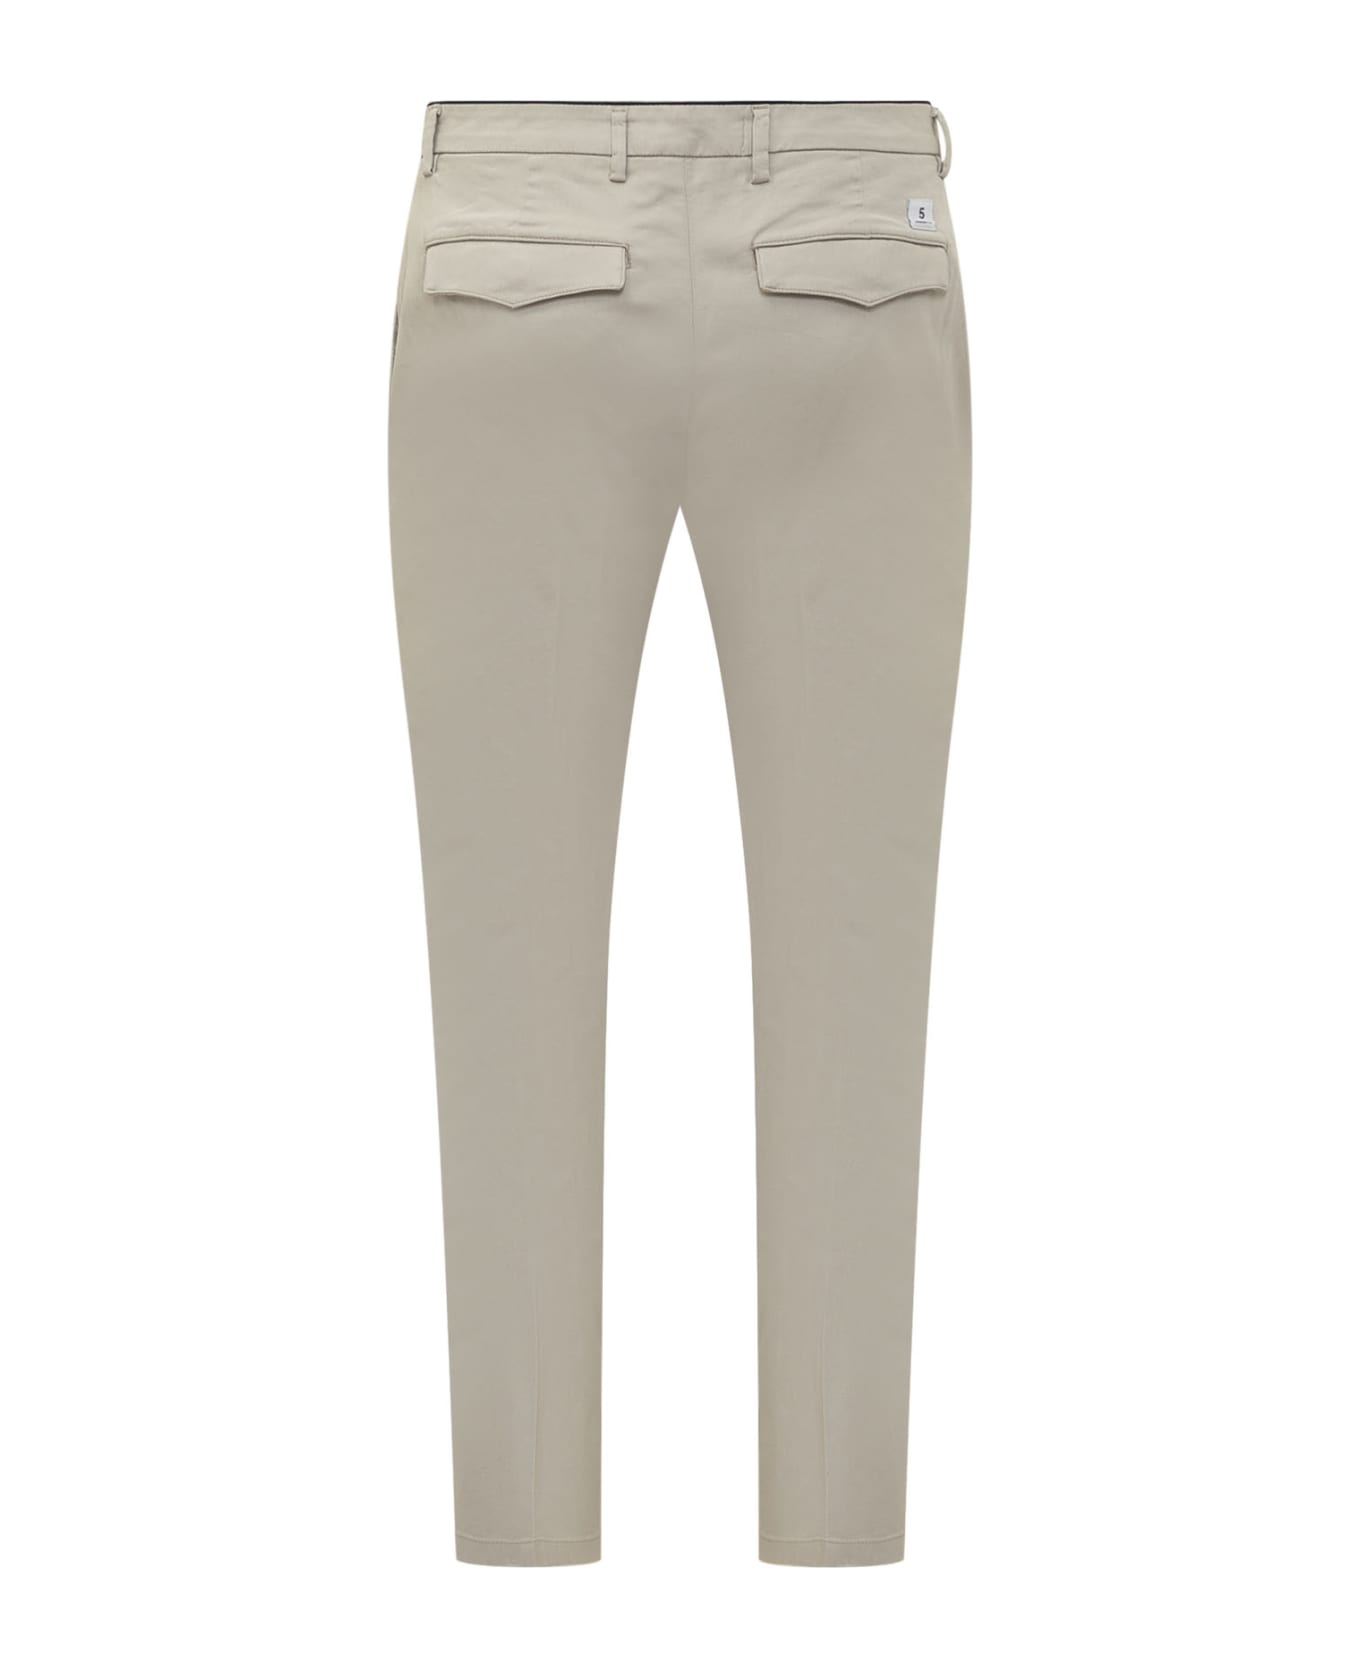 Department Five Prince Chinos Pants - STUCCO